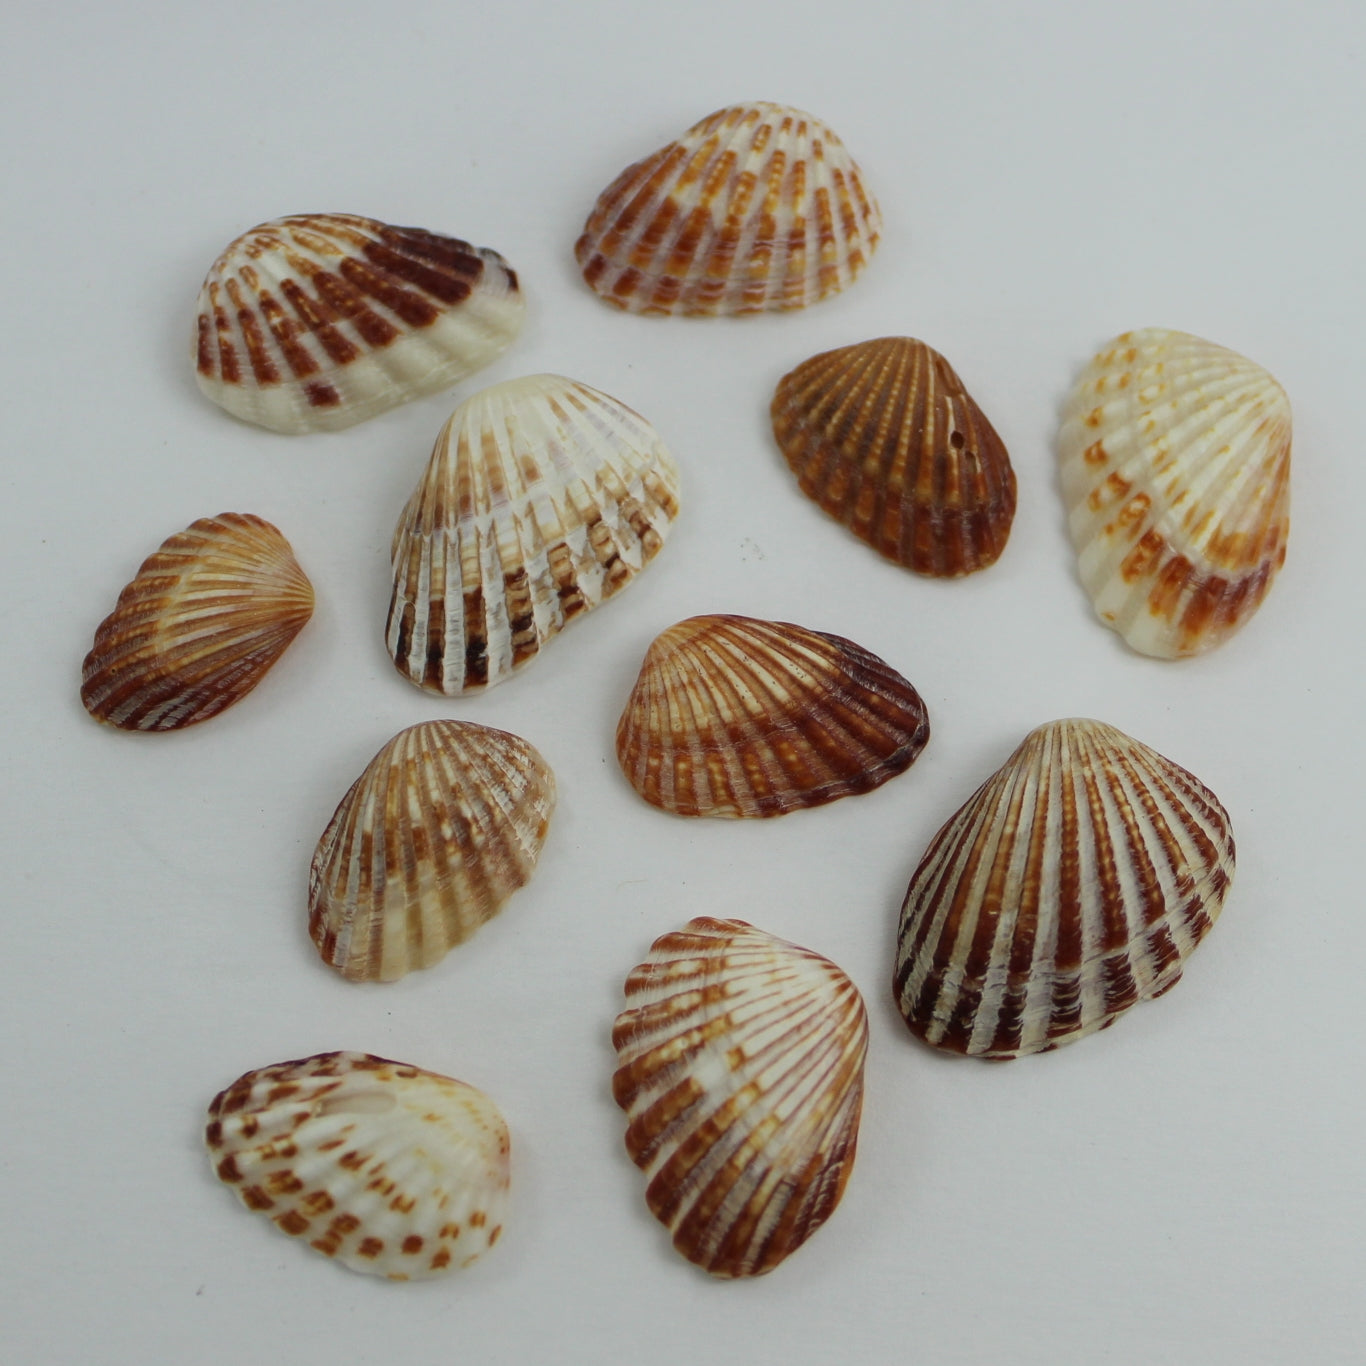 Natural Red Cardita Loose Seashells - Jewelry Craft Shell Art Decor Display sample of shades of color